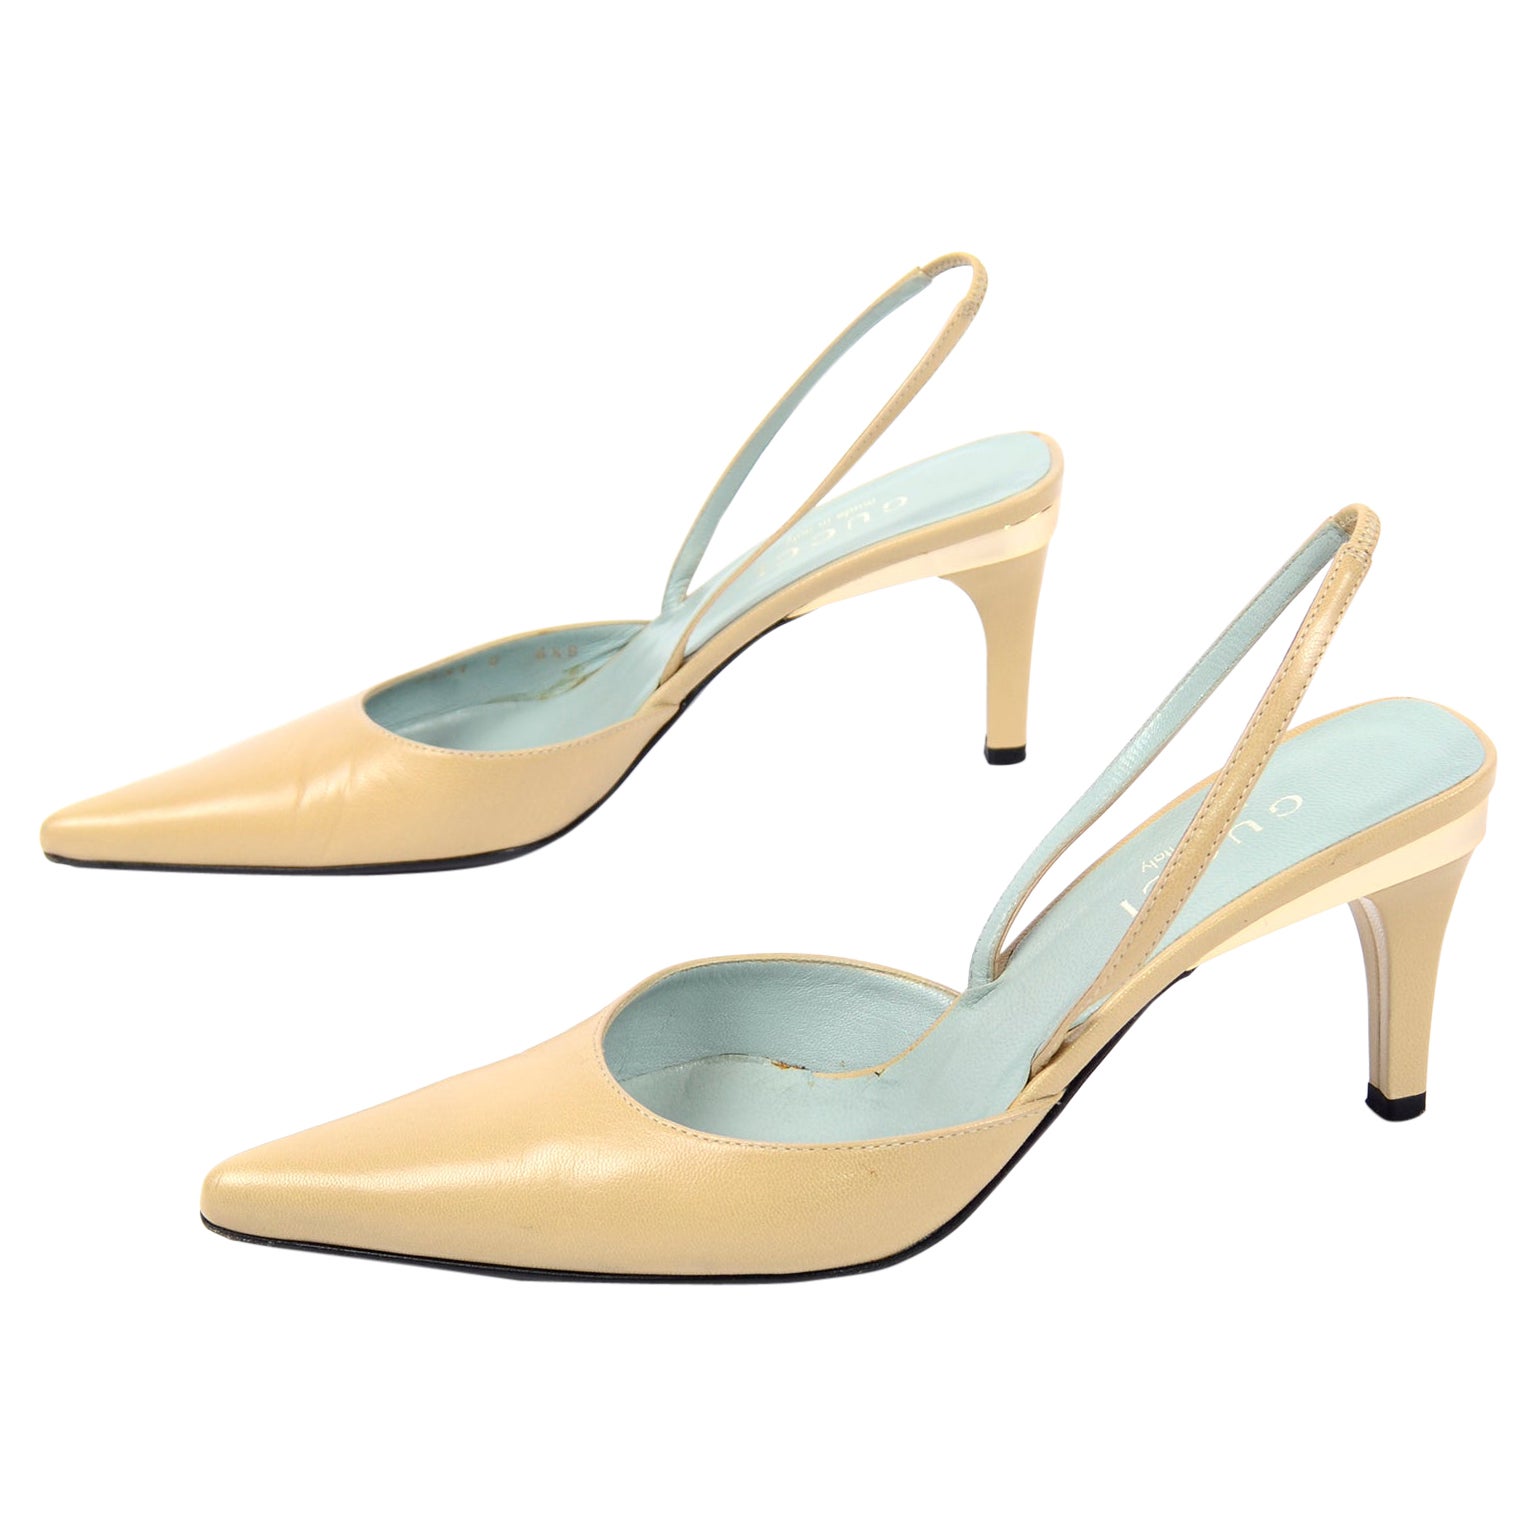 Gucci Slingback Beige Tan Heels With Gold Bands